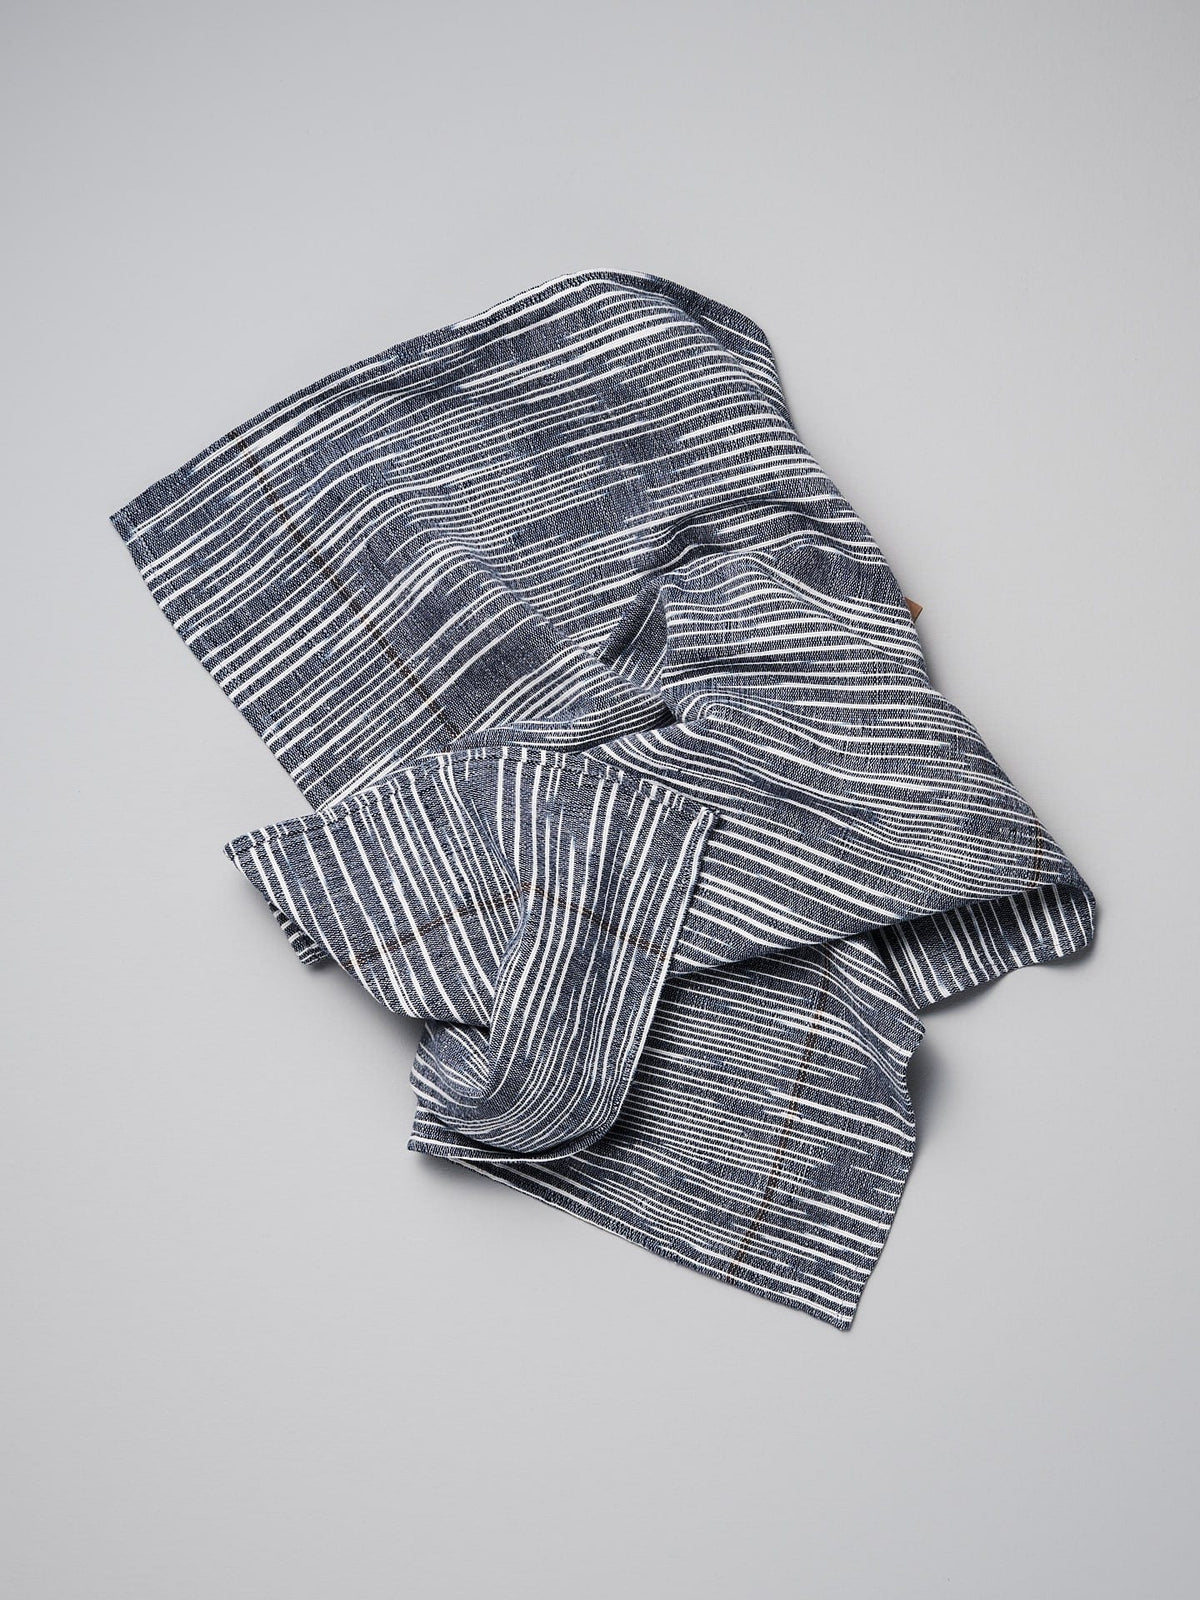 A Khadi Weave Tea-towel – Navy by Stitchwallah on a white surface.